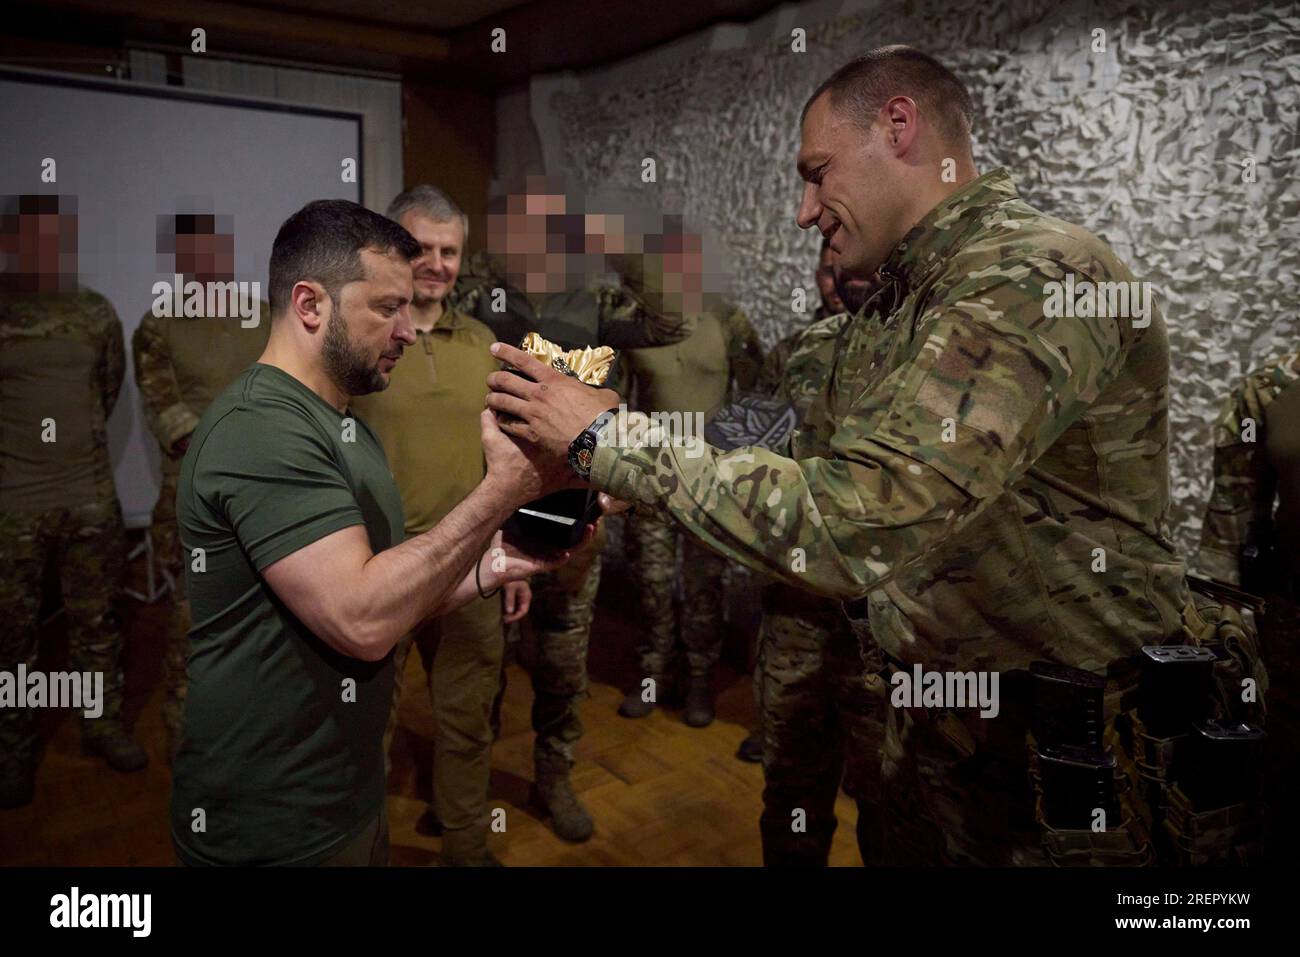 Donetsk, Ukraine. 29th July, 2023. Ukrainian President Volodymyr Zelenskyy, left, is presented a statue of the Silver Wolf by Special Operations Forces, Brigadier General Viktor Khorenko, right, during a visit to frontline positions in the Donetsk region, July 29, 2023 in Donetsk Oblast, Ukraine. Zelenskyy visited SOF commandos to mark Special Operations Forces Day and stopped at a petrol station along the way to greet supporters. Credit: Pool Photo/Ukrainian Presidential Press Office/Alamy Live News Stock Photo